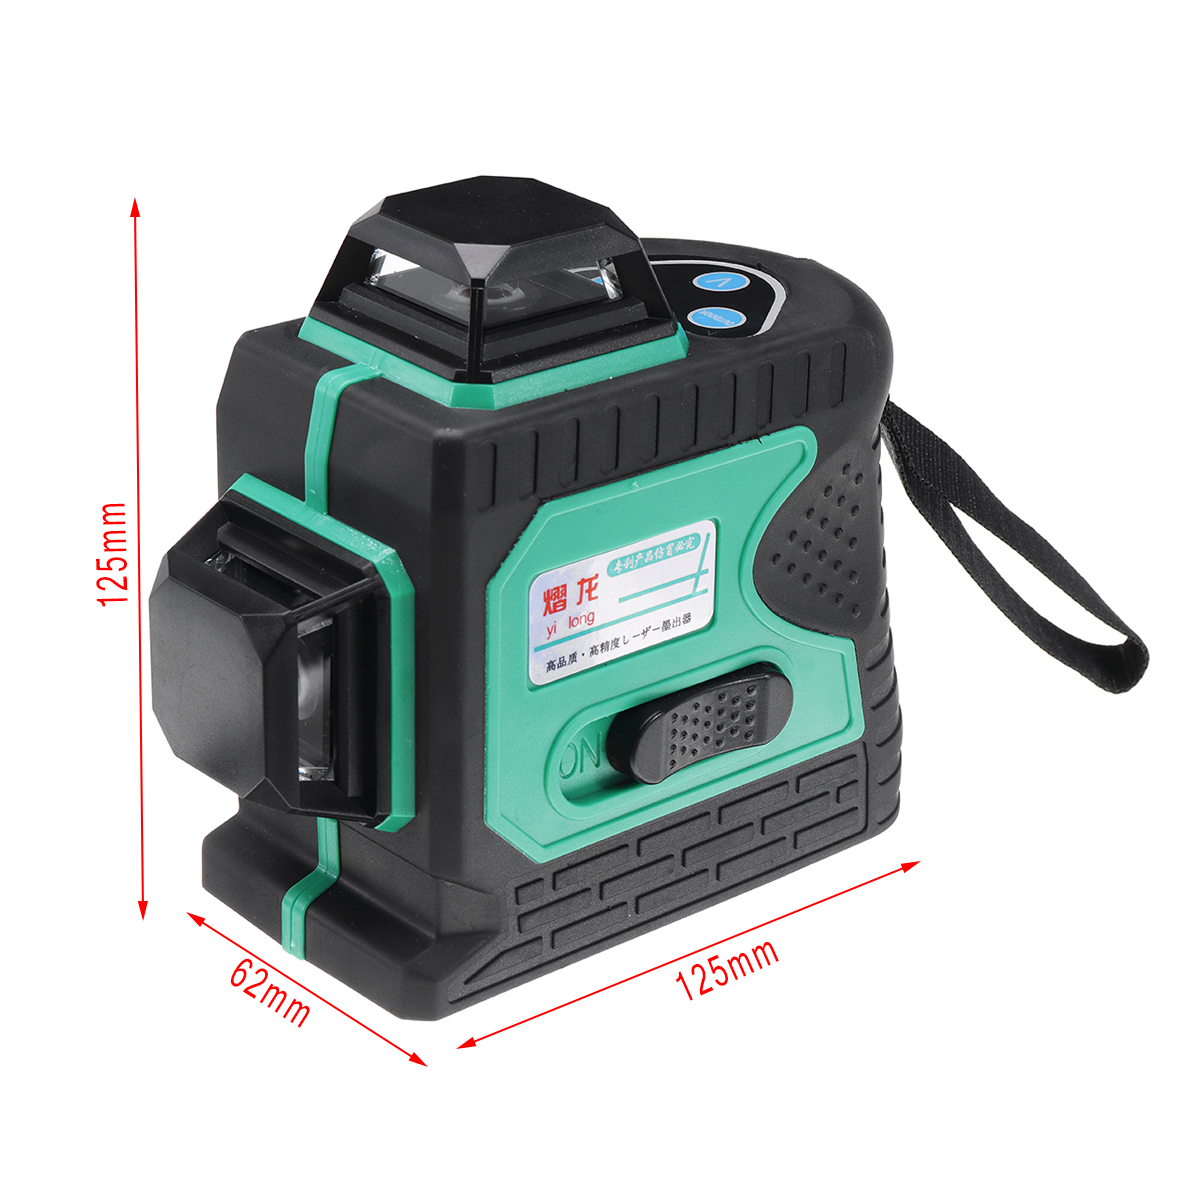 Blue-green-Light-12-line-Outdoor-Strong-Laser-Level-Infrared-Light-High-precision-Automatic-1445383-10